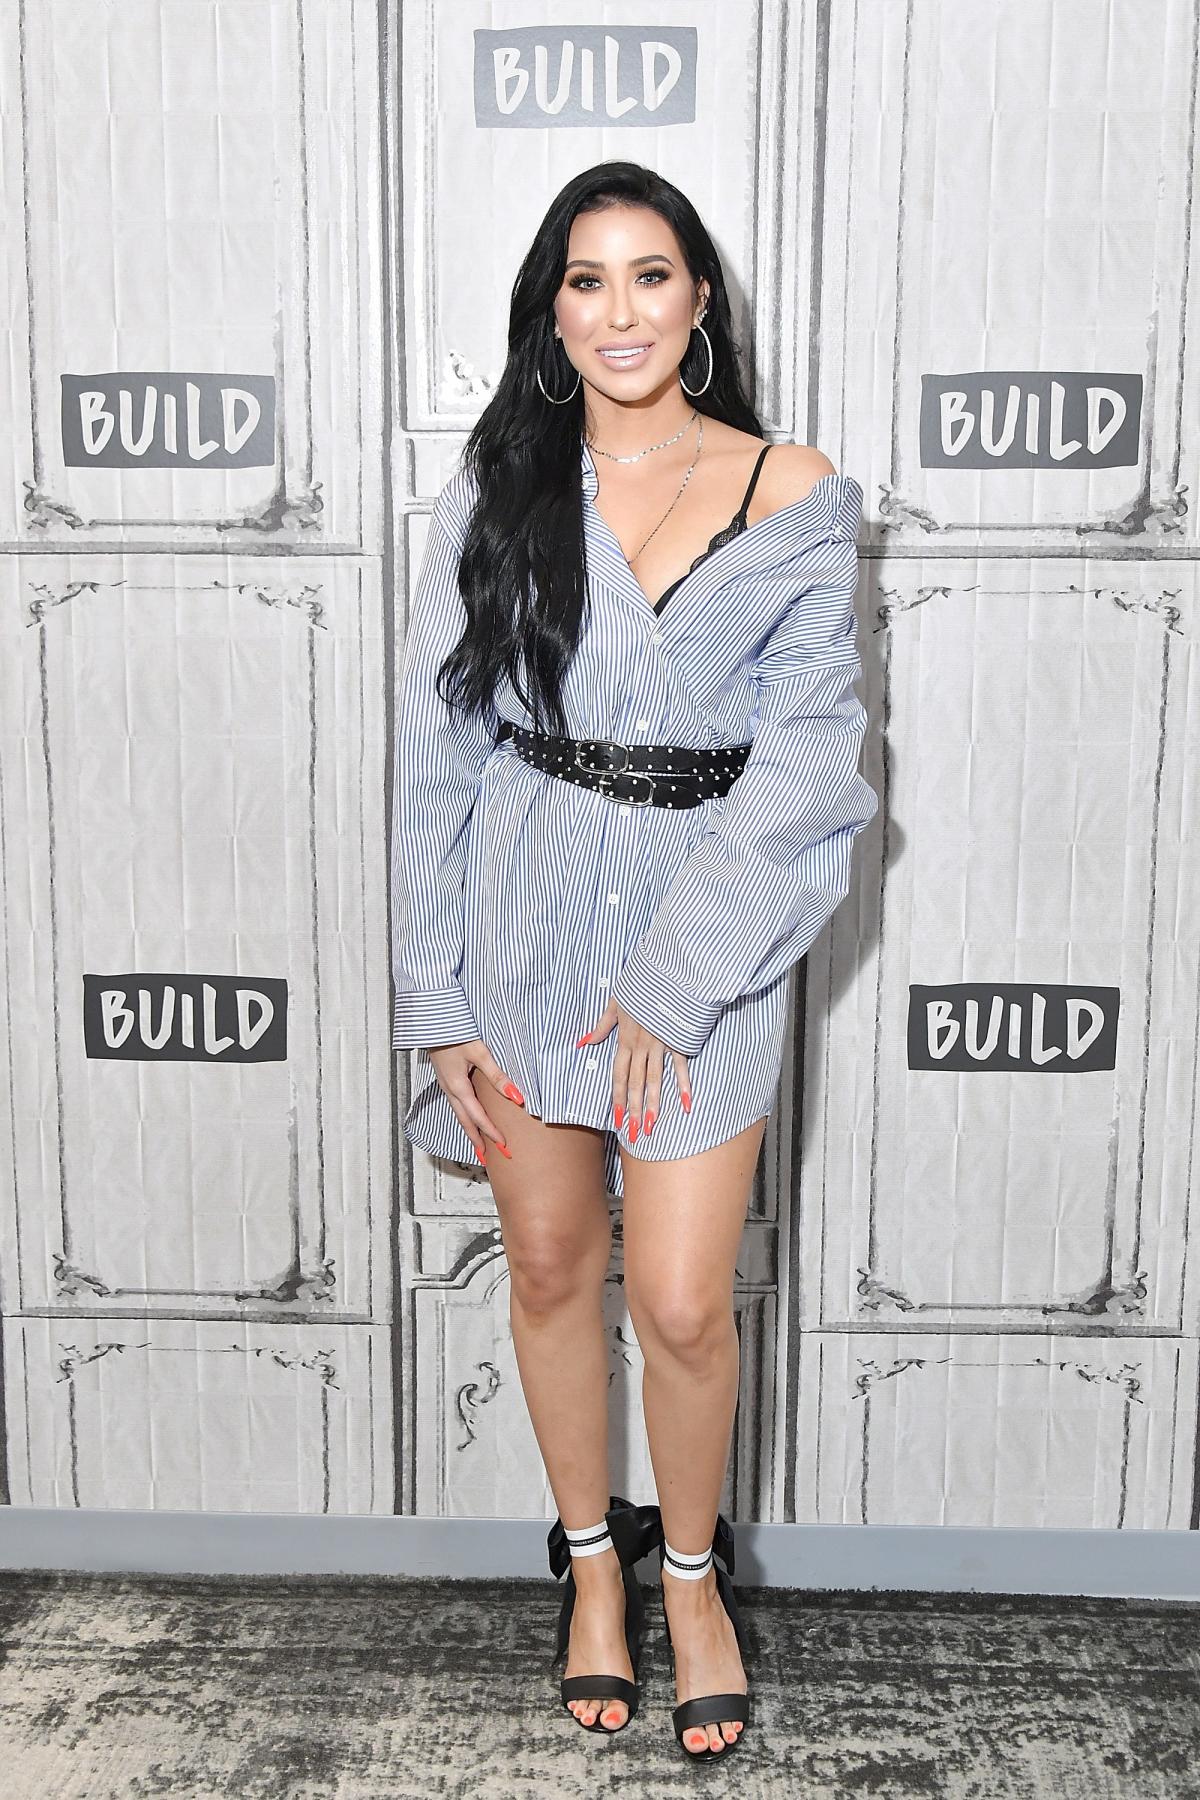 Jaclyn Hill Proudly Displays Stretch Marks After Weight Criticism